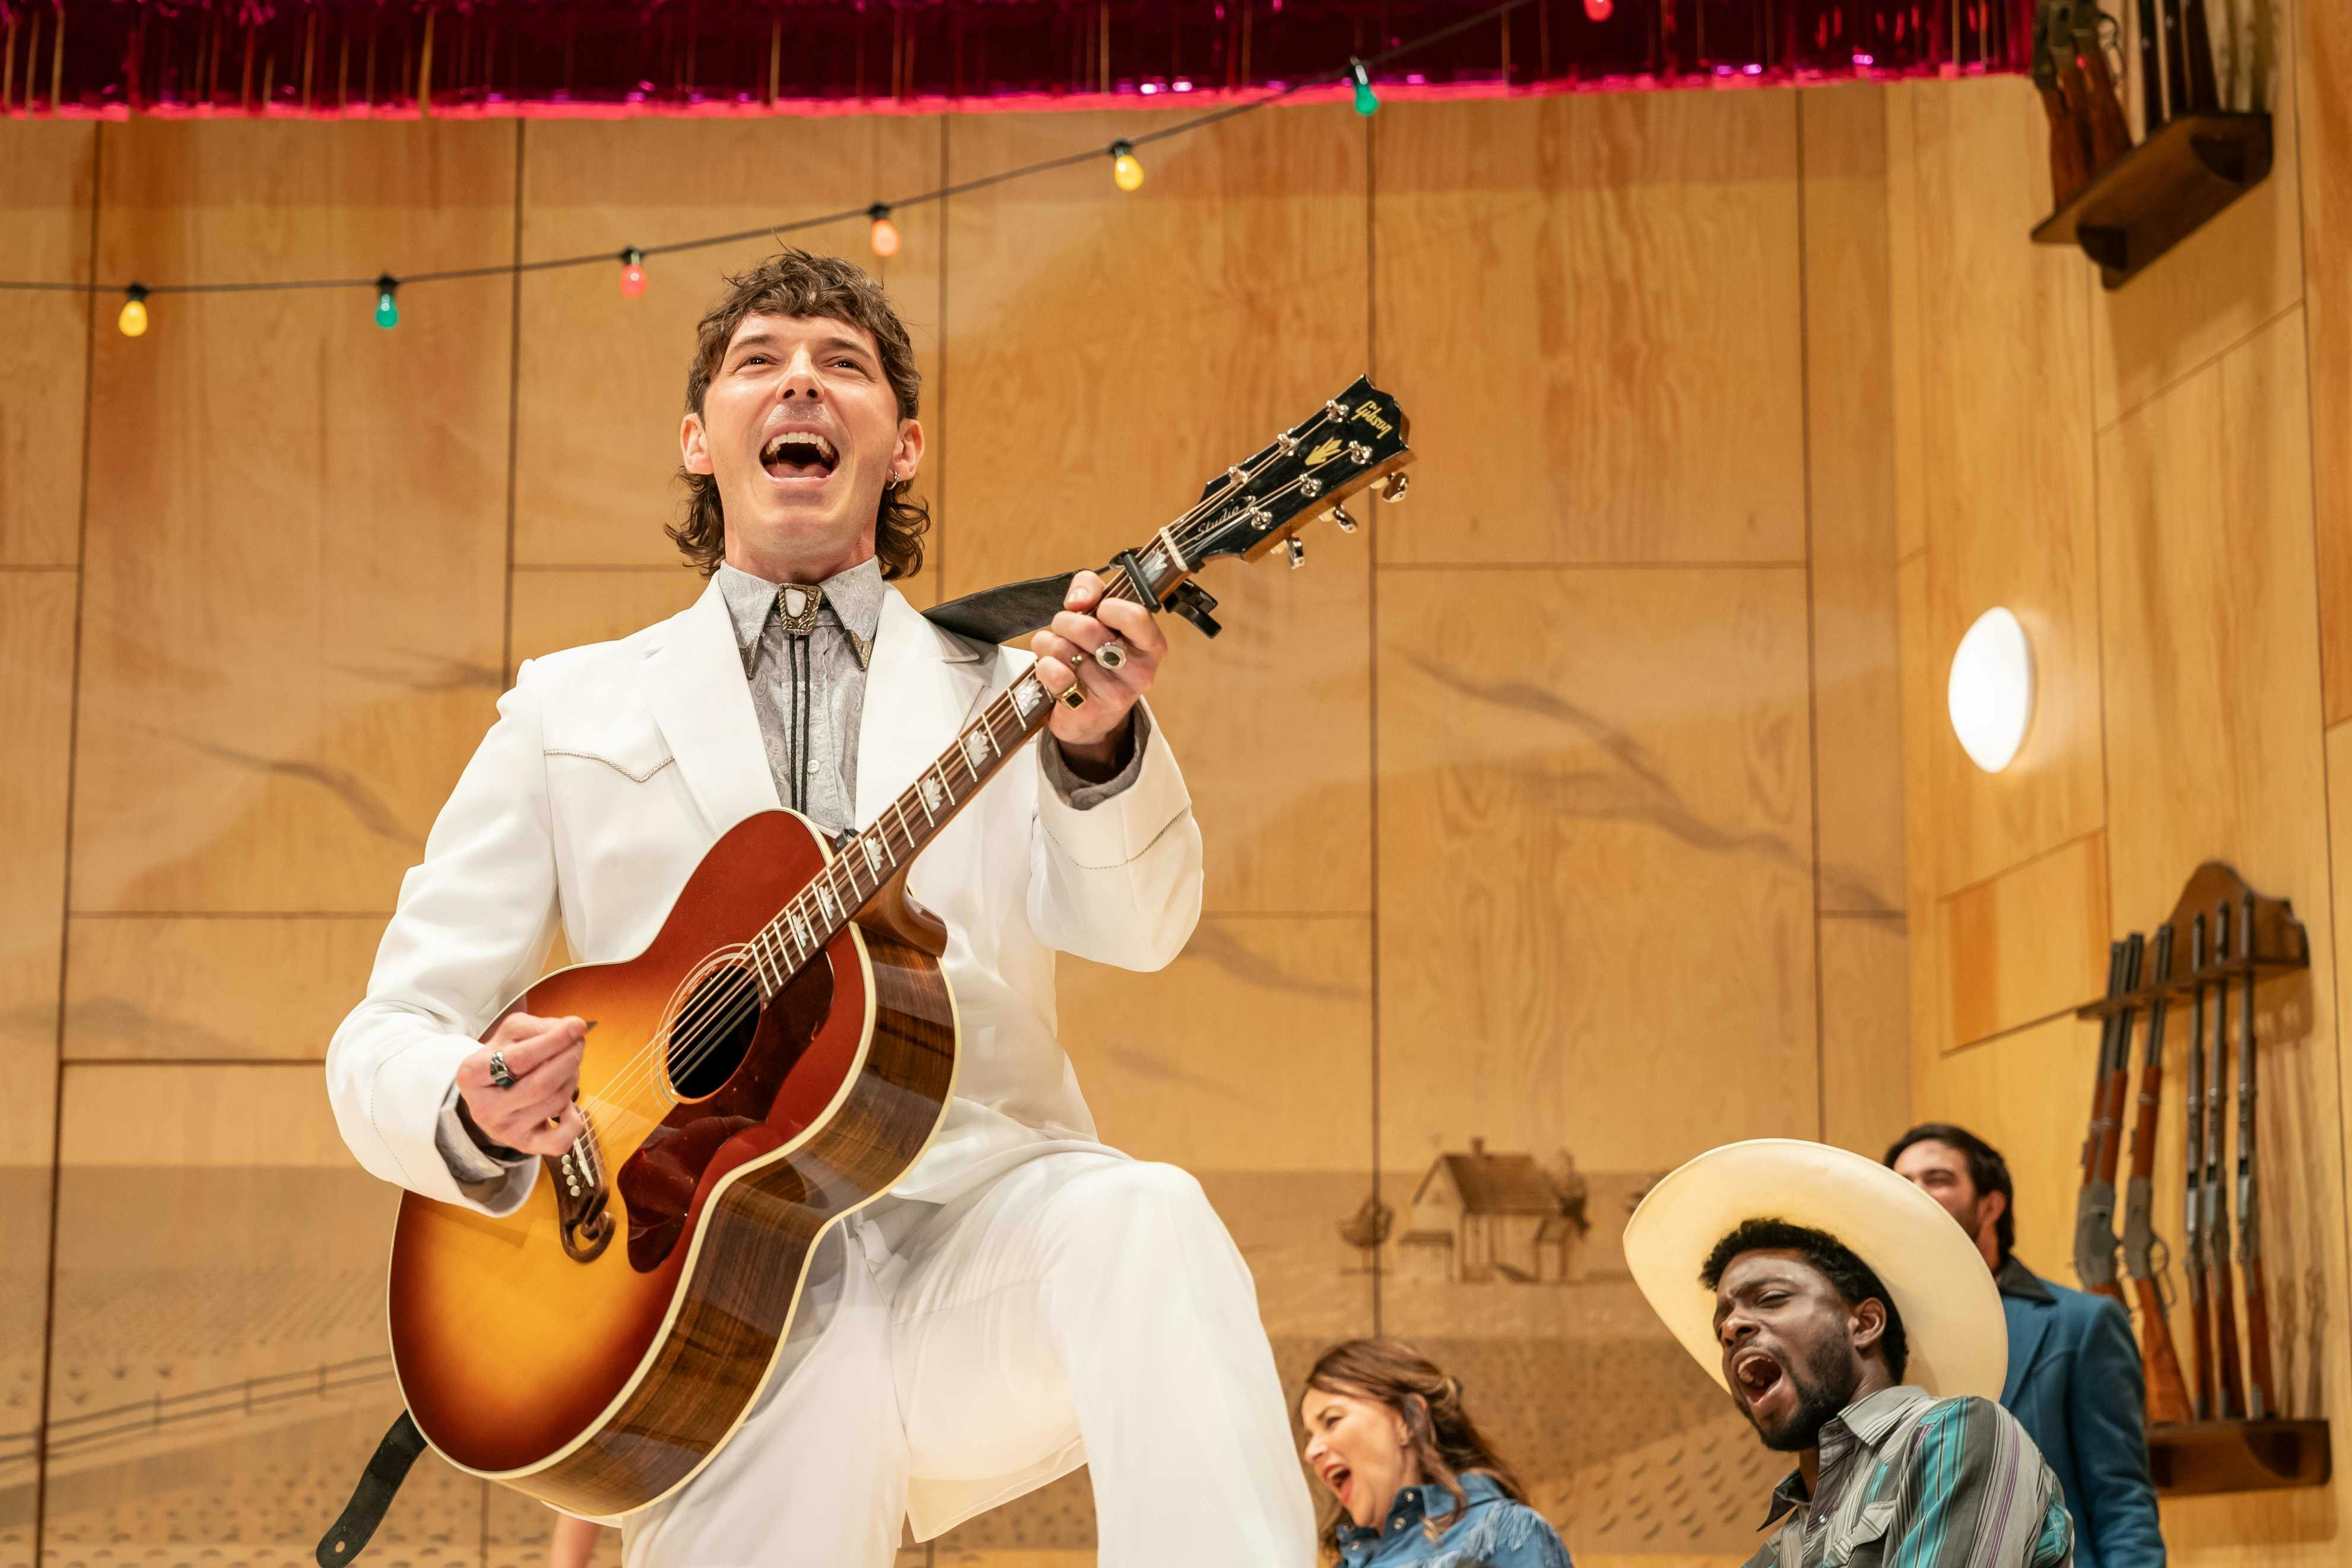 Oklahoma: The Musical - man singing and playing guitar on stage